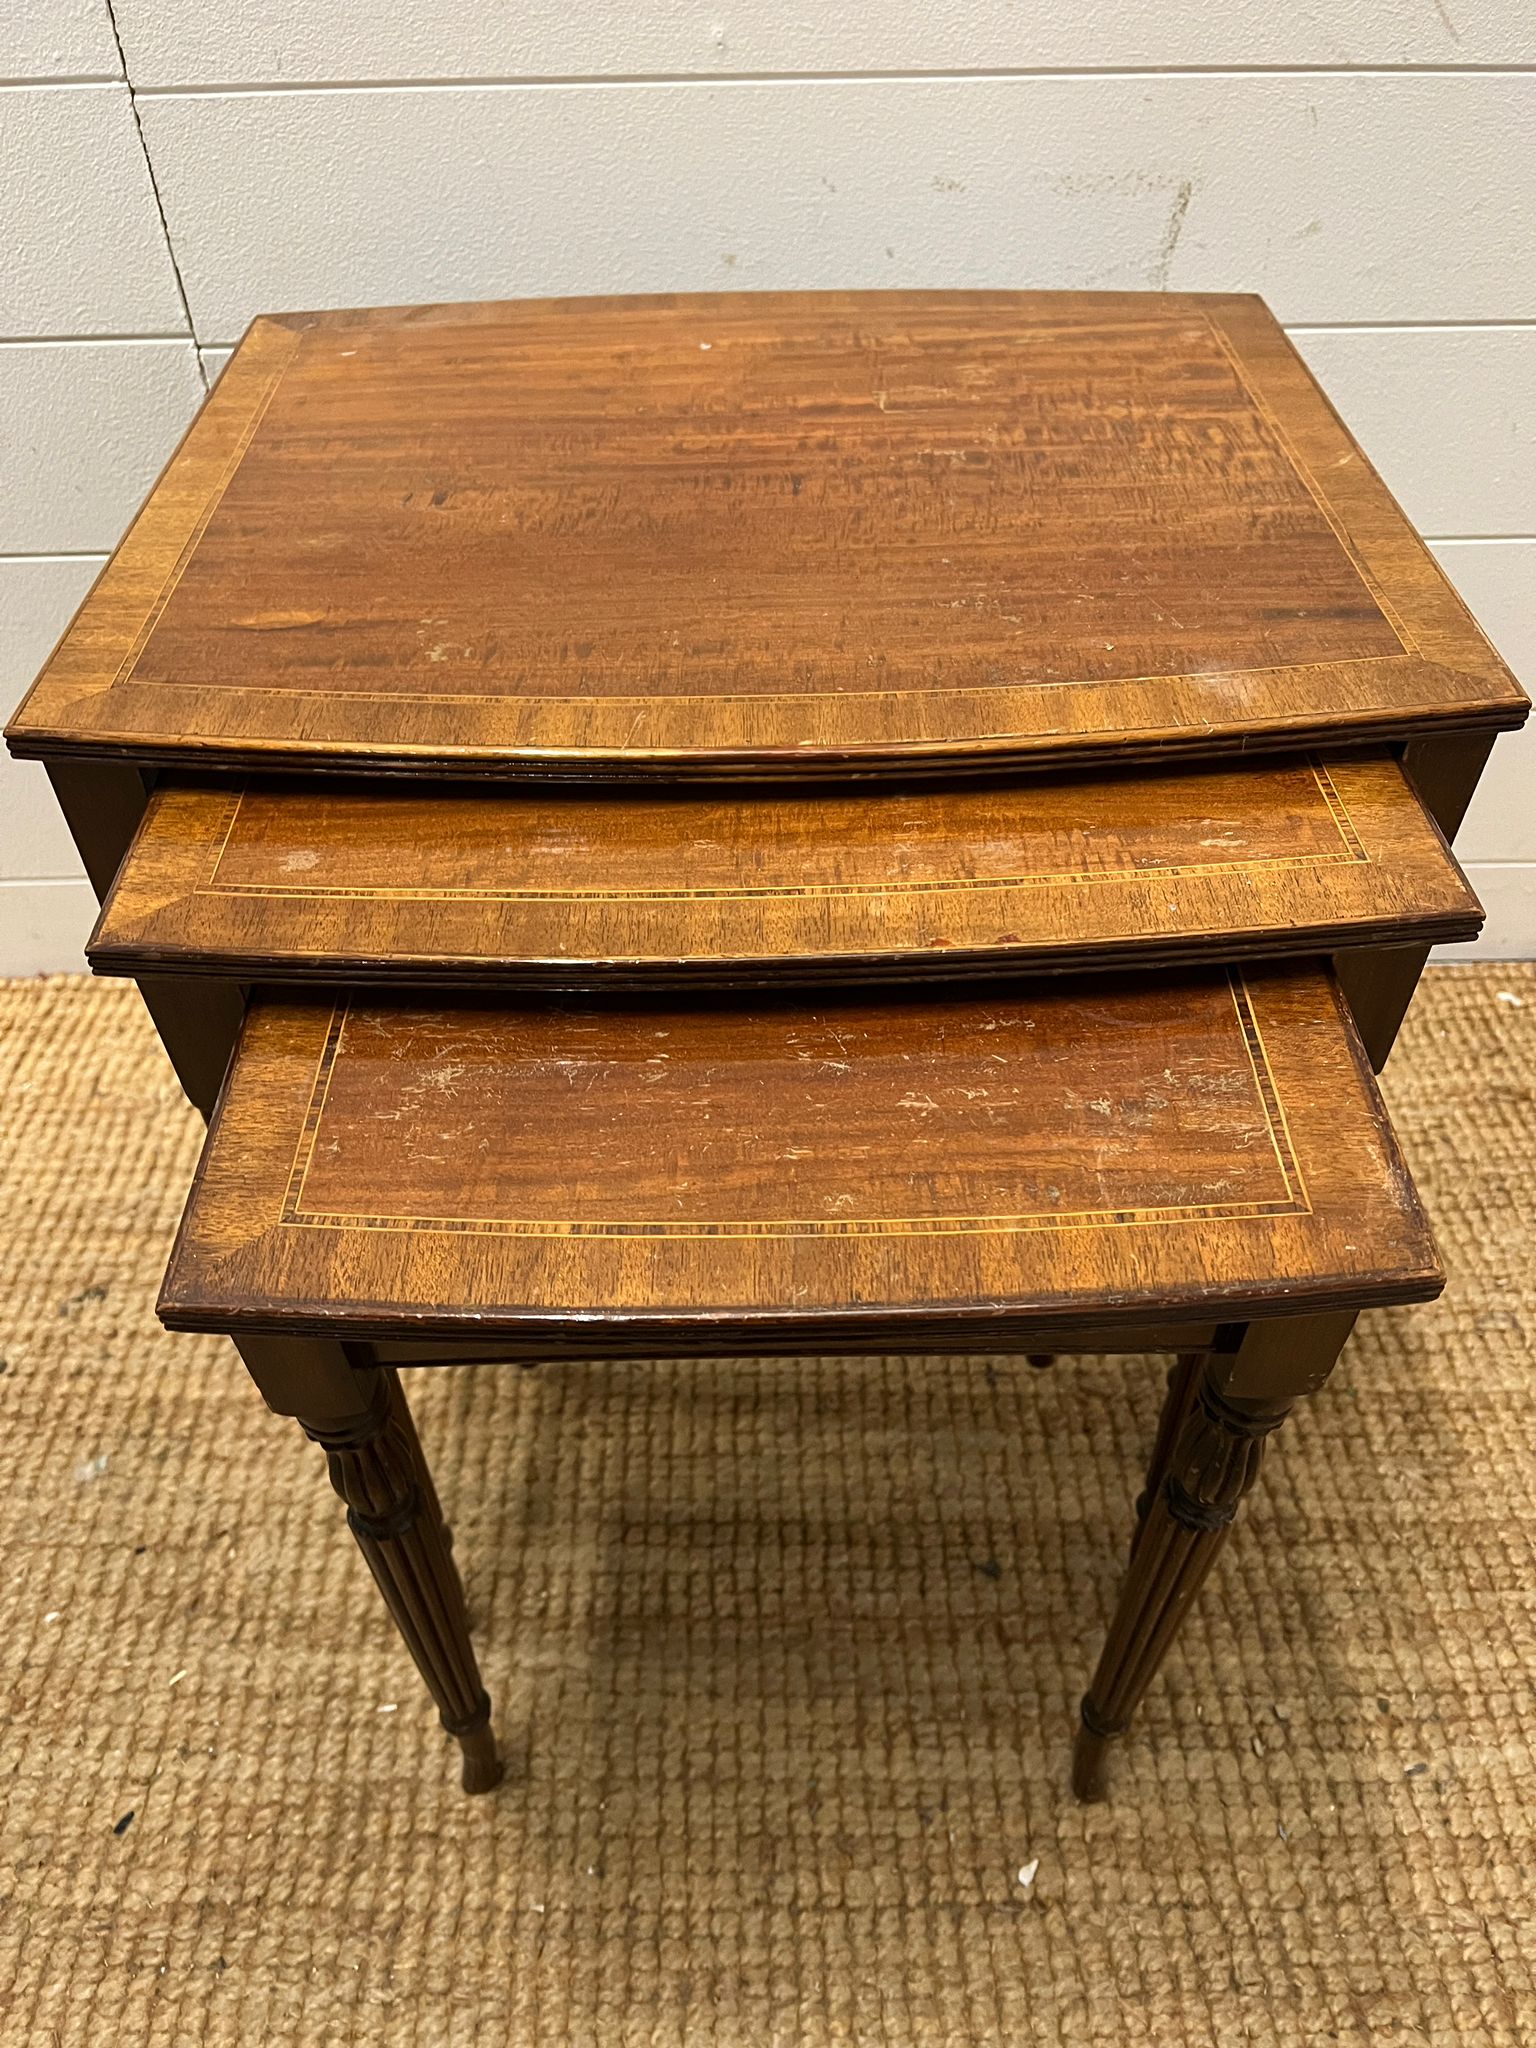 A set of nesting tables with string inlay and fluted legs (H51cm W50cm D38cm) - Image 2 of 4